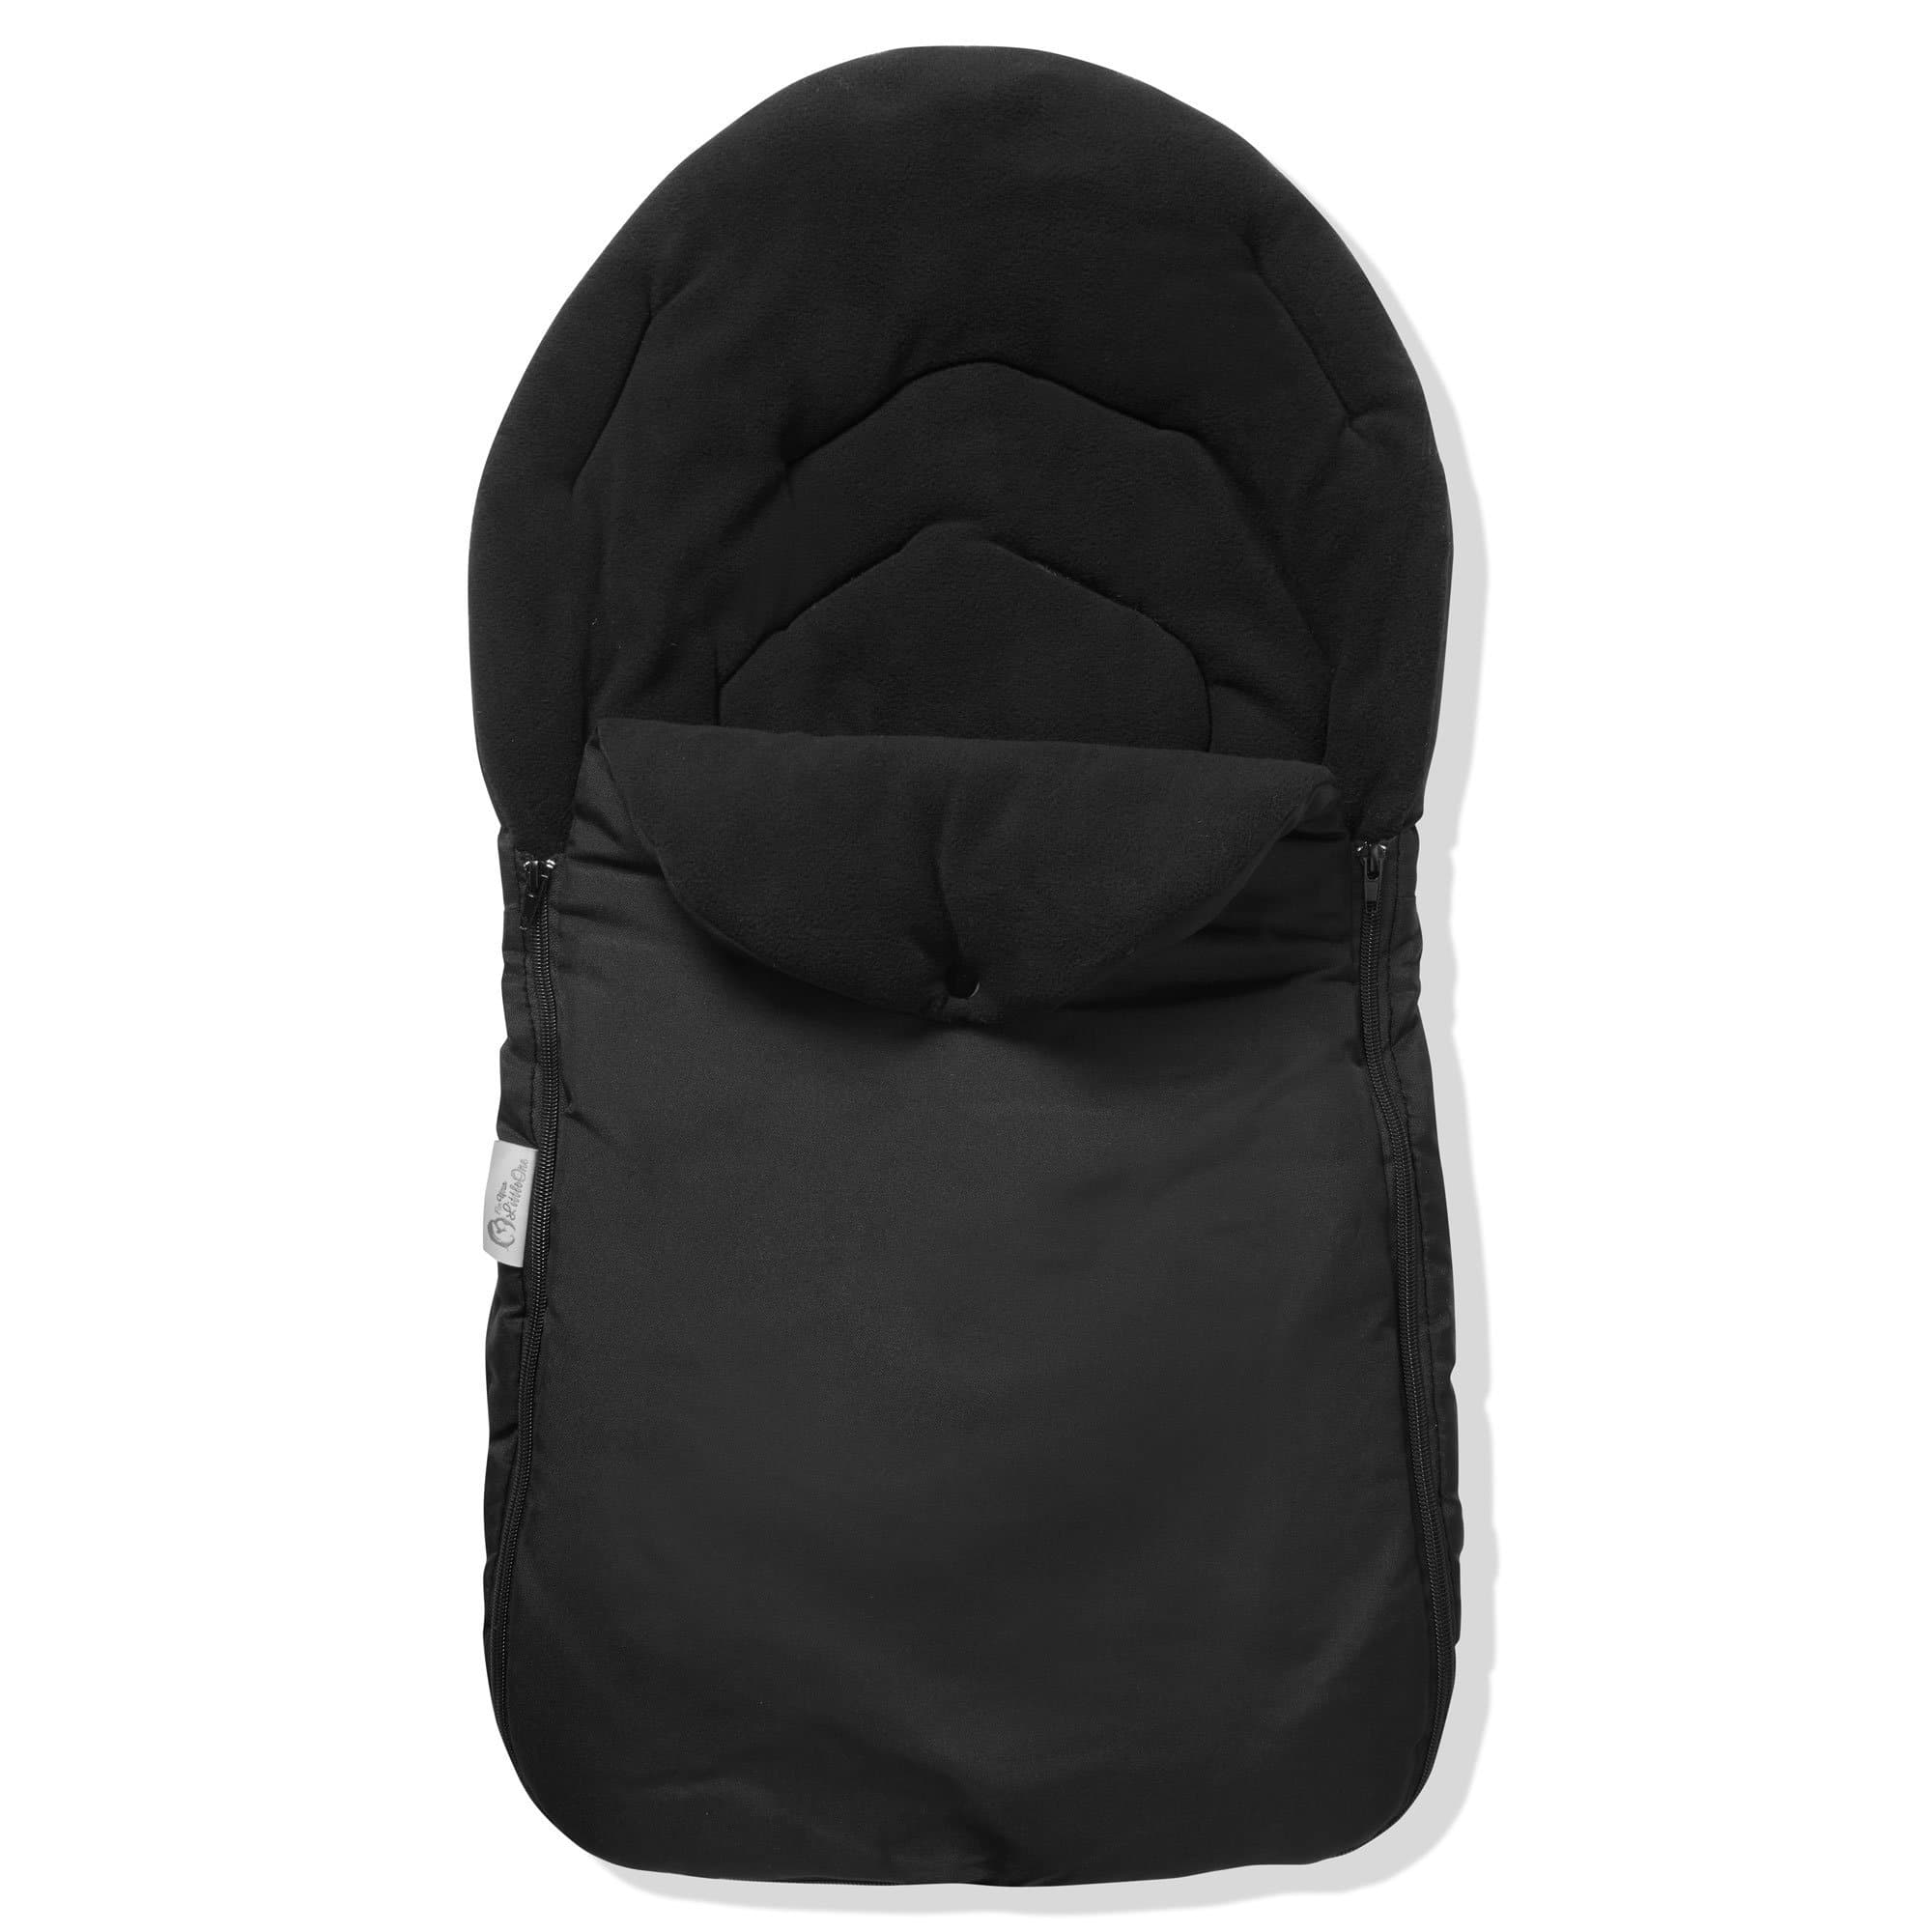 Car Seat Footmuff / Cosy Toes Compatible with Joie - Black / Fits All Models | For Your Little One